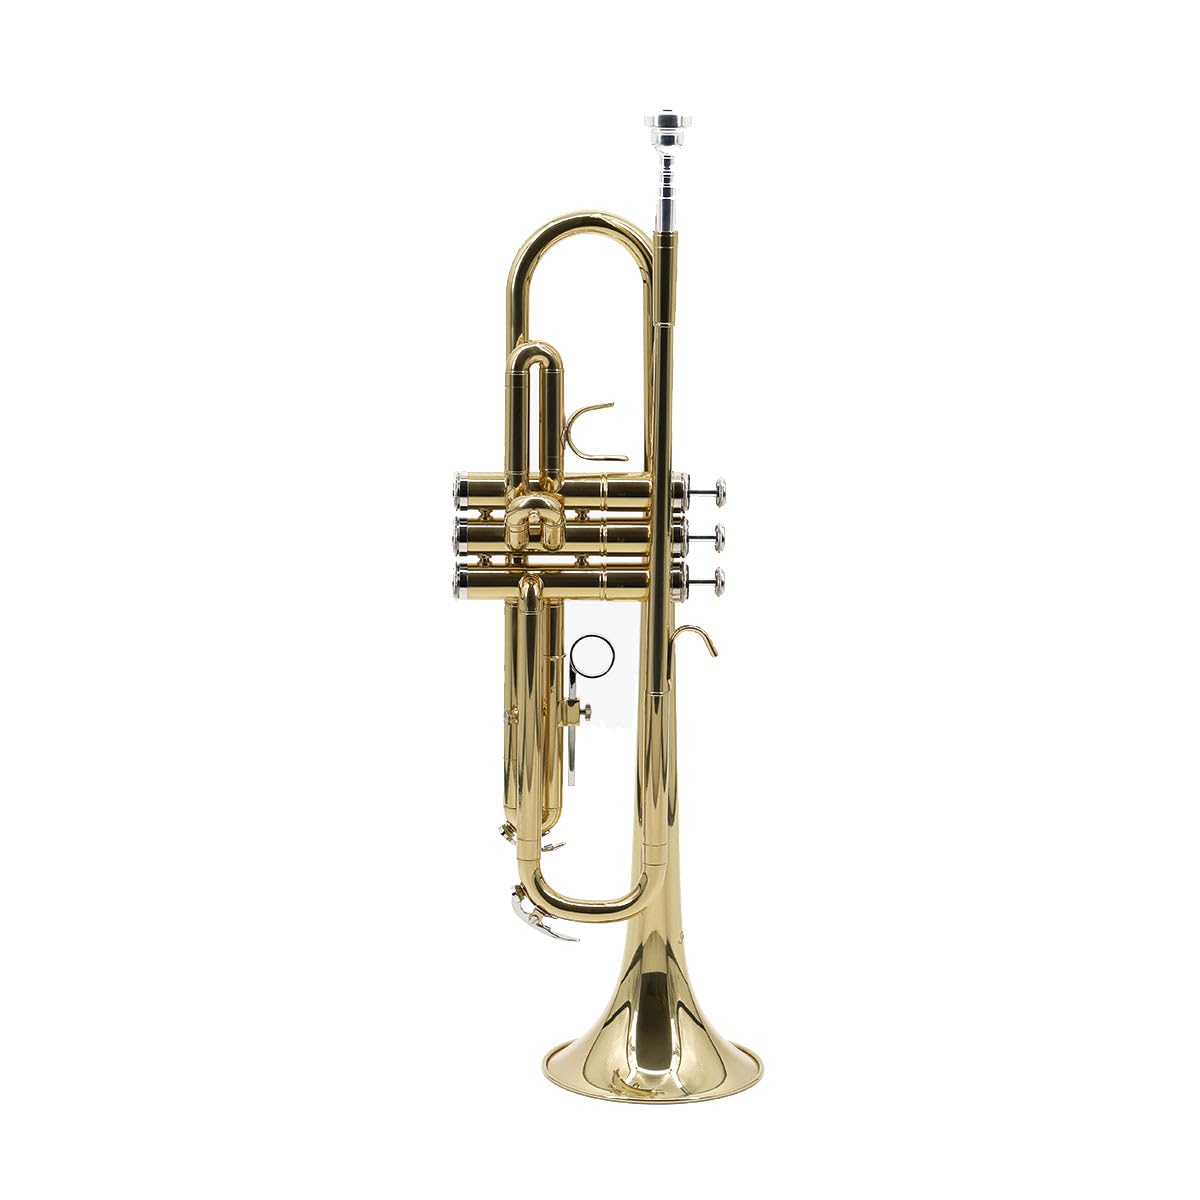 StarQuest TR250 Trumpet .460” Bore - High-Precision Nickel-Plated Valves, Ideal for Students and Experienced Musicians, Complete with Case & Accessories